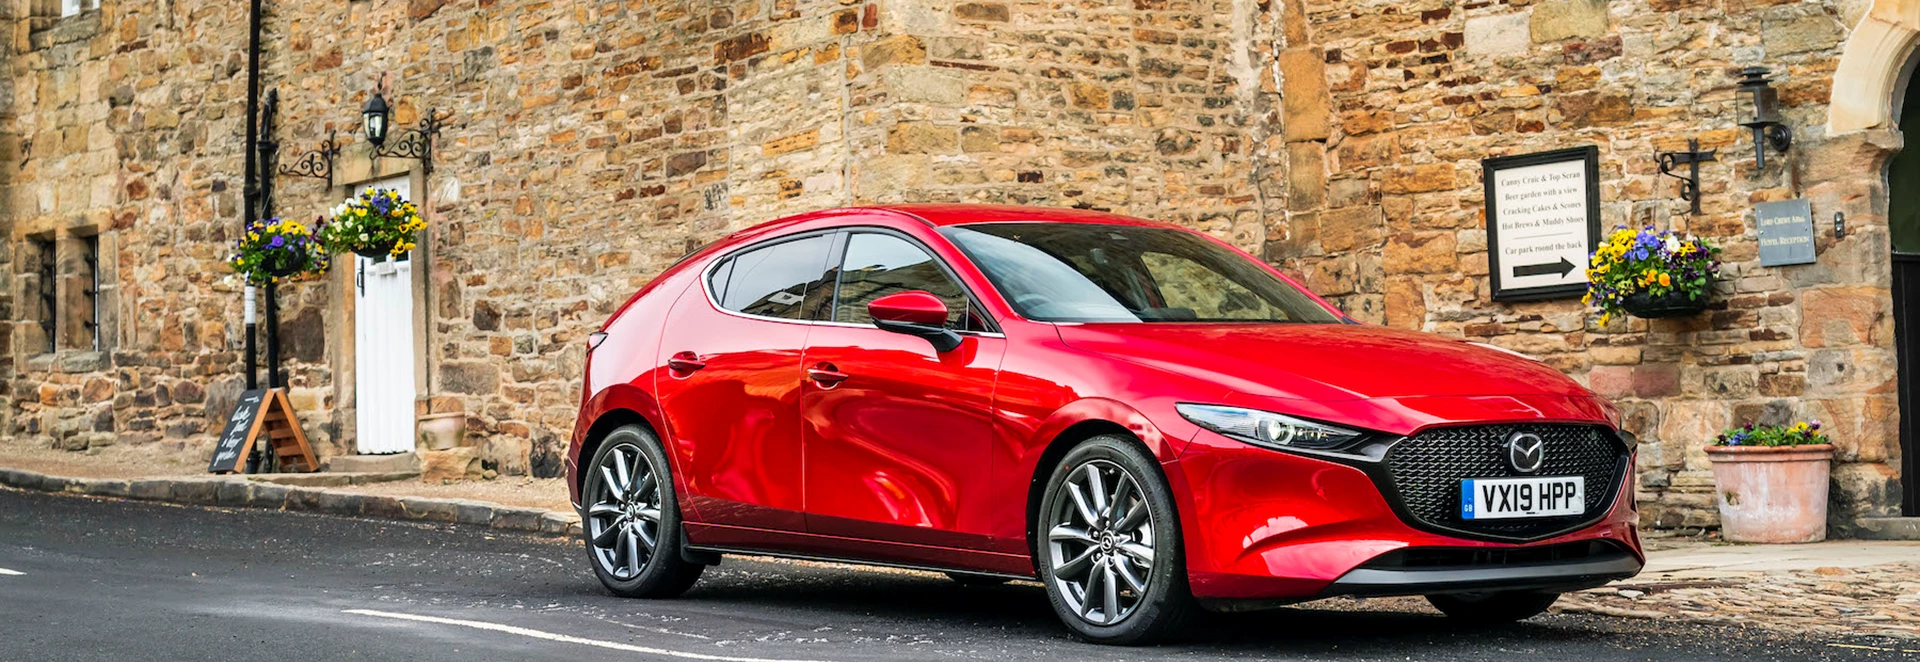 New Mazda3 named as ‘2020 World Car Design of the Year’ 